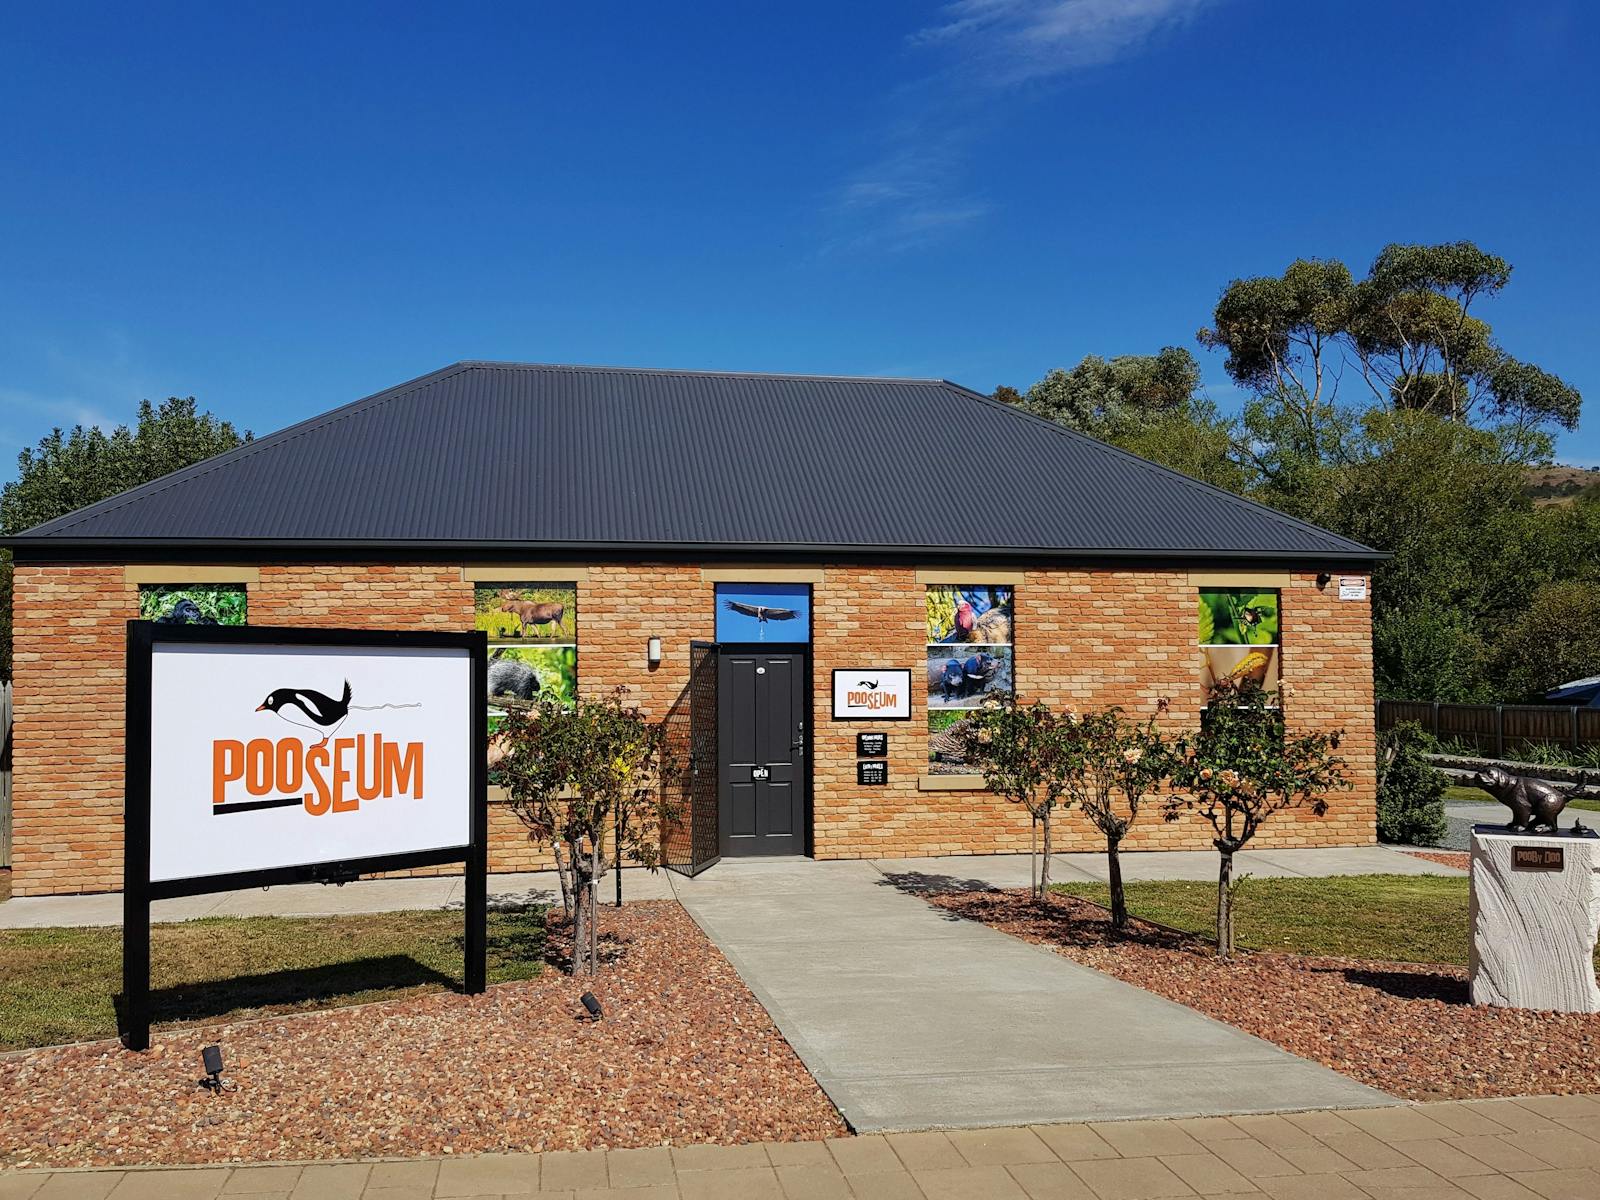 Pooseum, a new science museum about animal droppings in Richmond, Tasmania